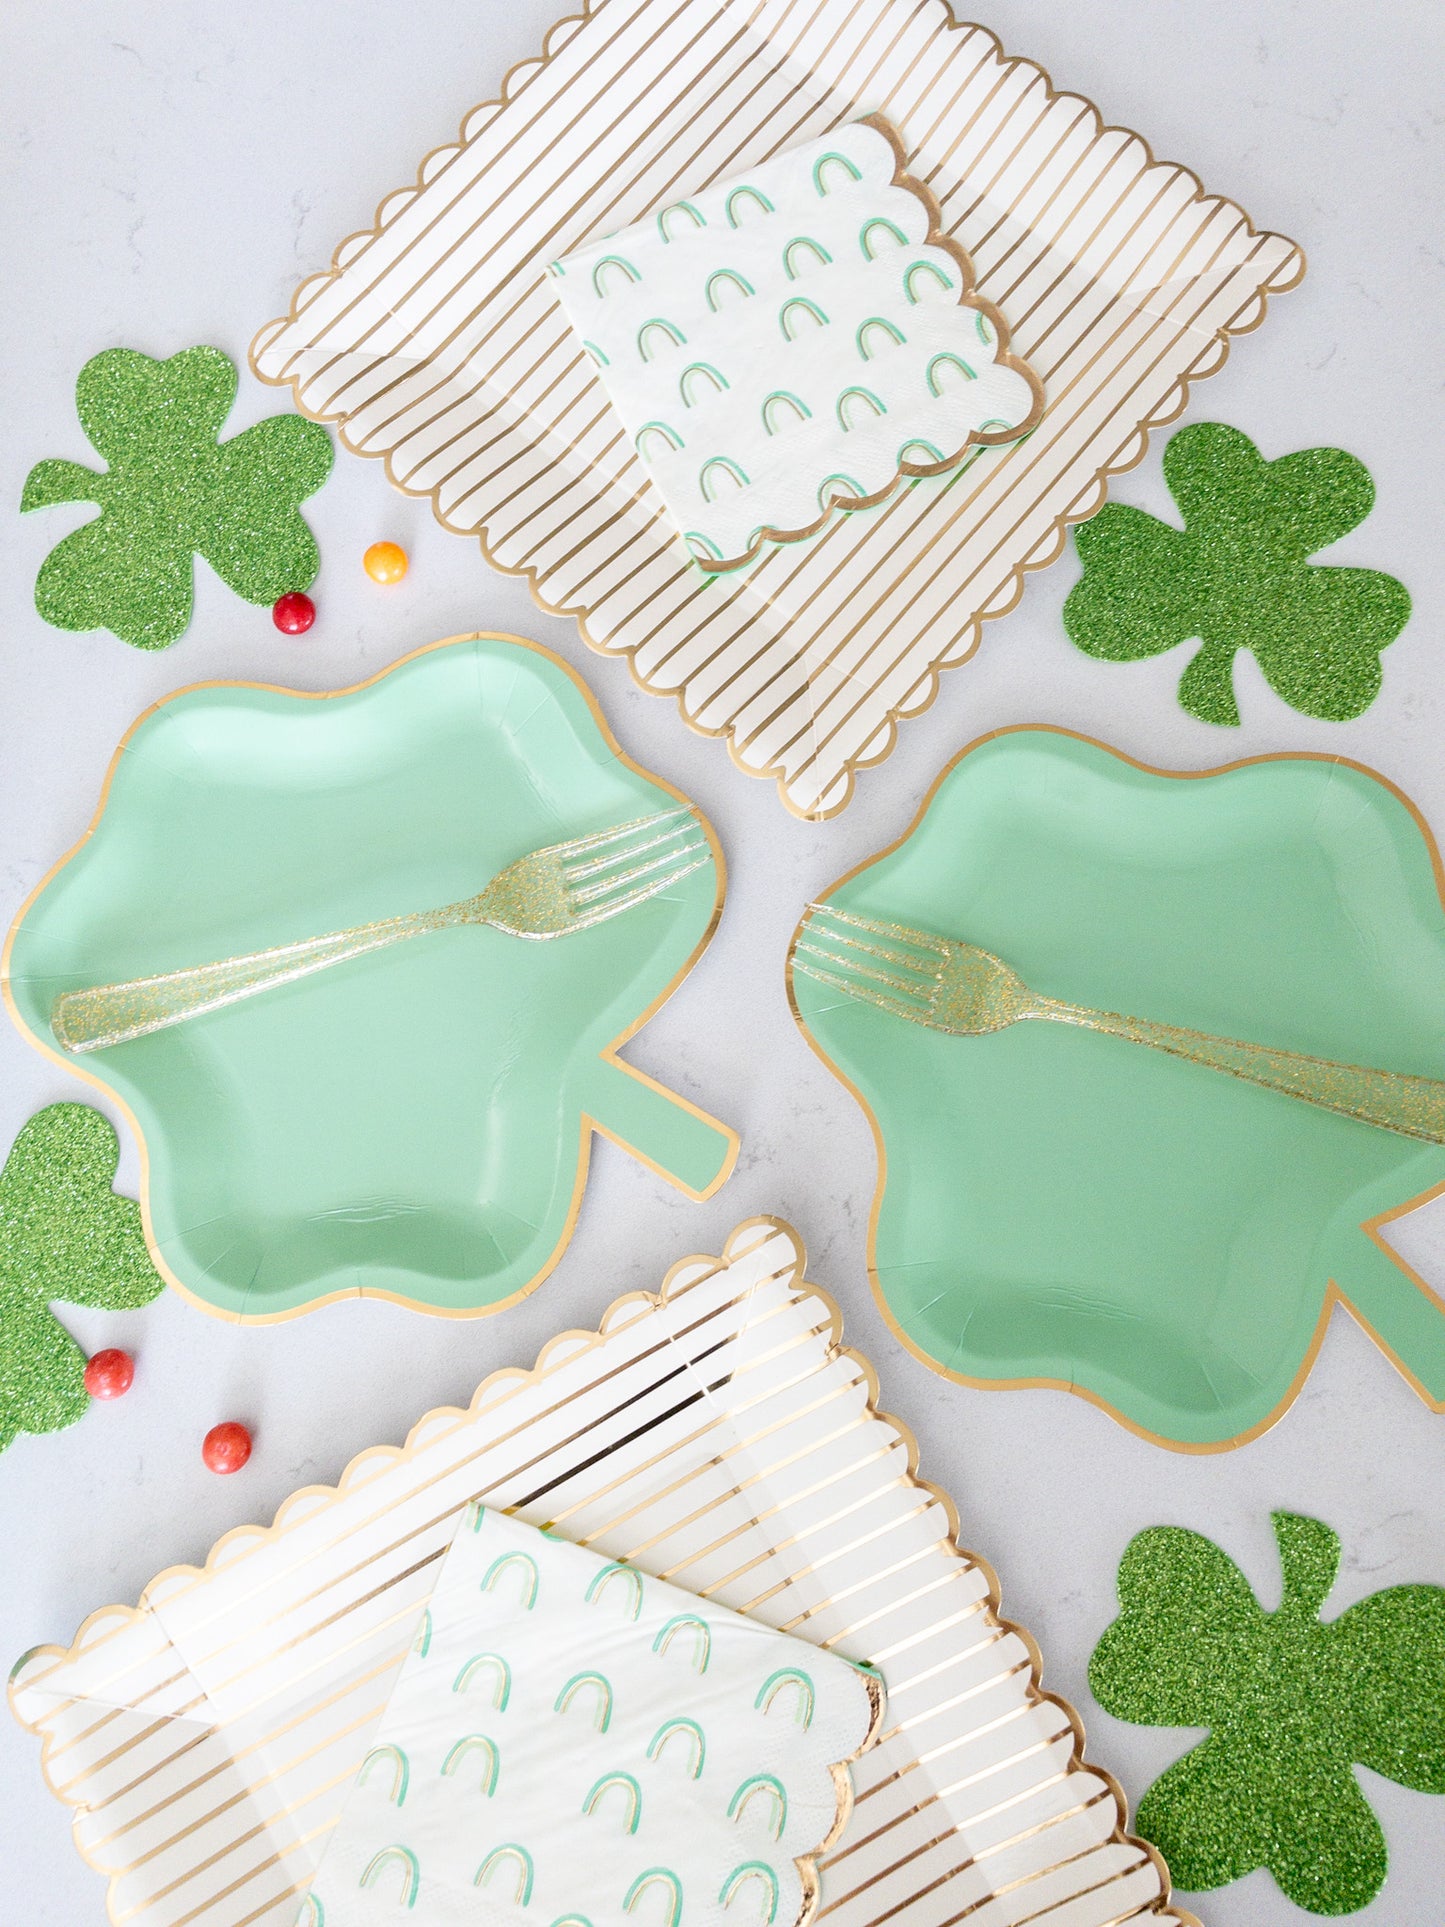 Clover Shaped Plate